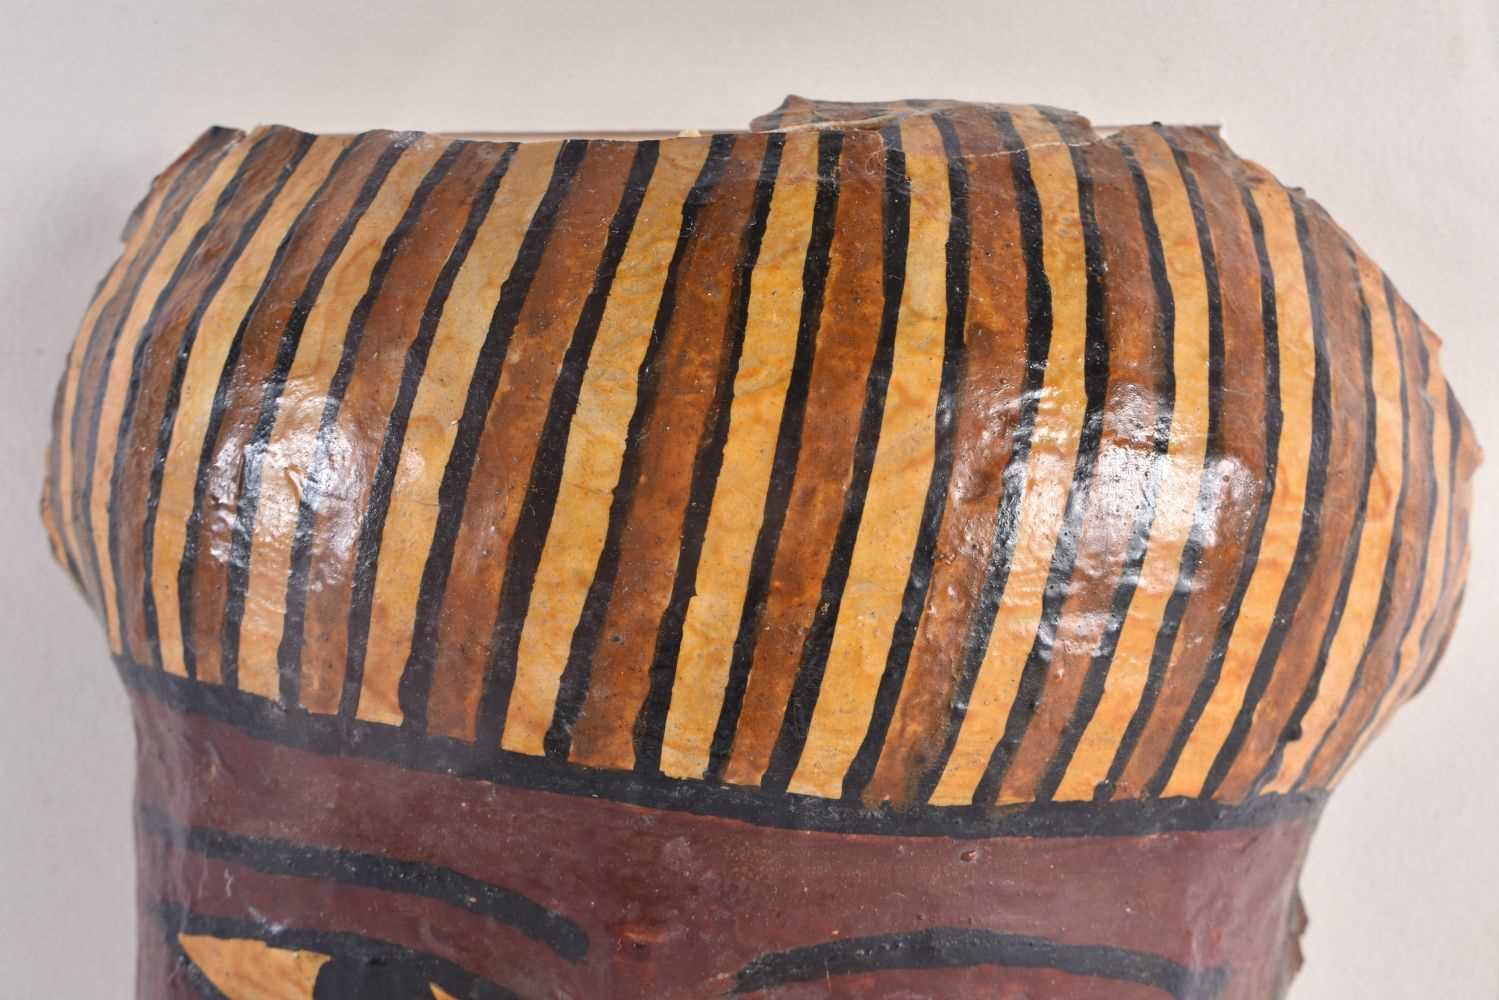 A FINE AND RARE EGYPTIAN CARTONNAGE MUMMY MASK Late Period 664-40 BC. 28 cm x 22 cm. - Image 3 of 6